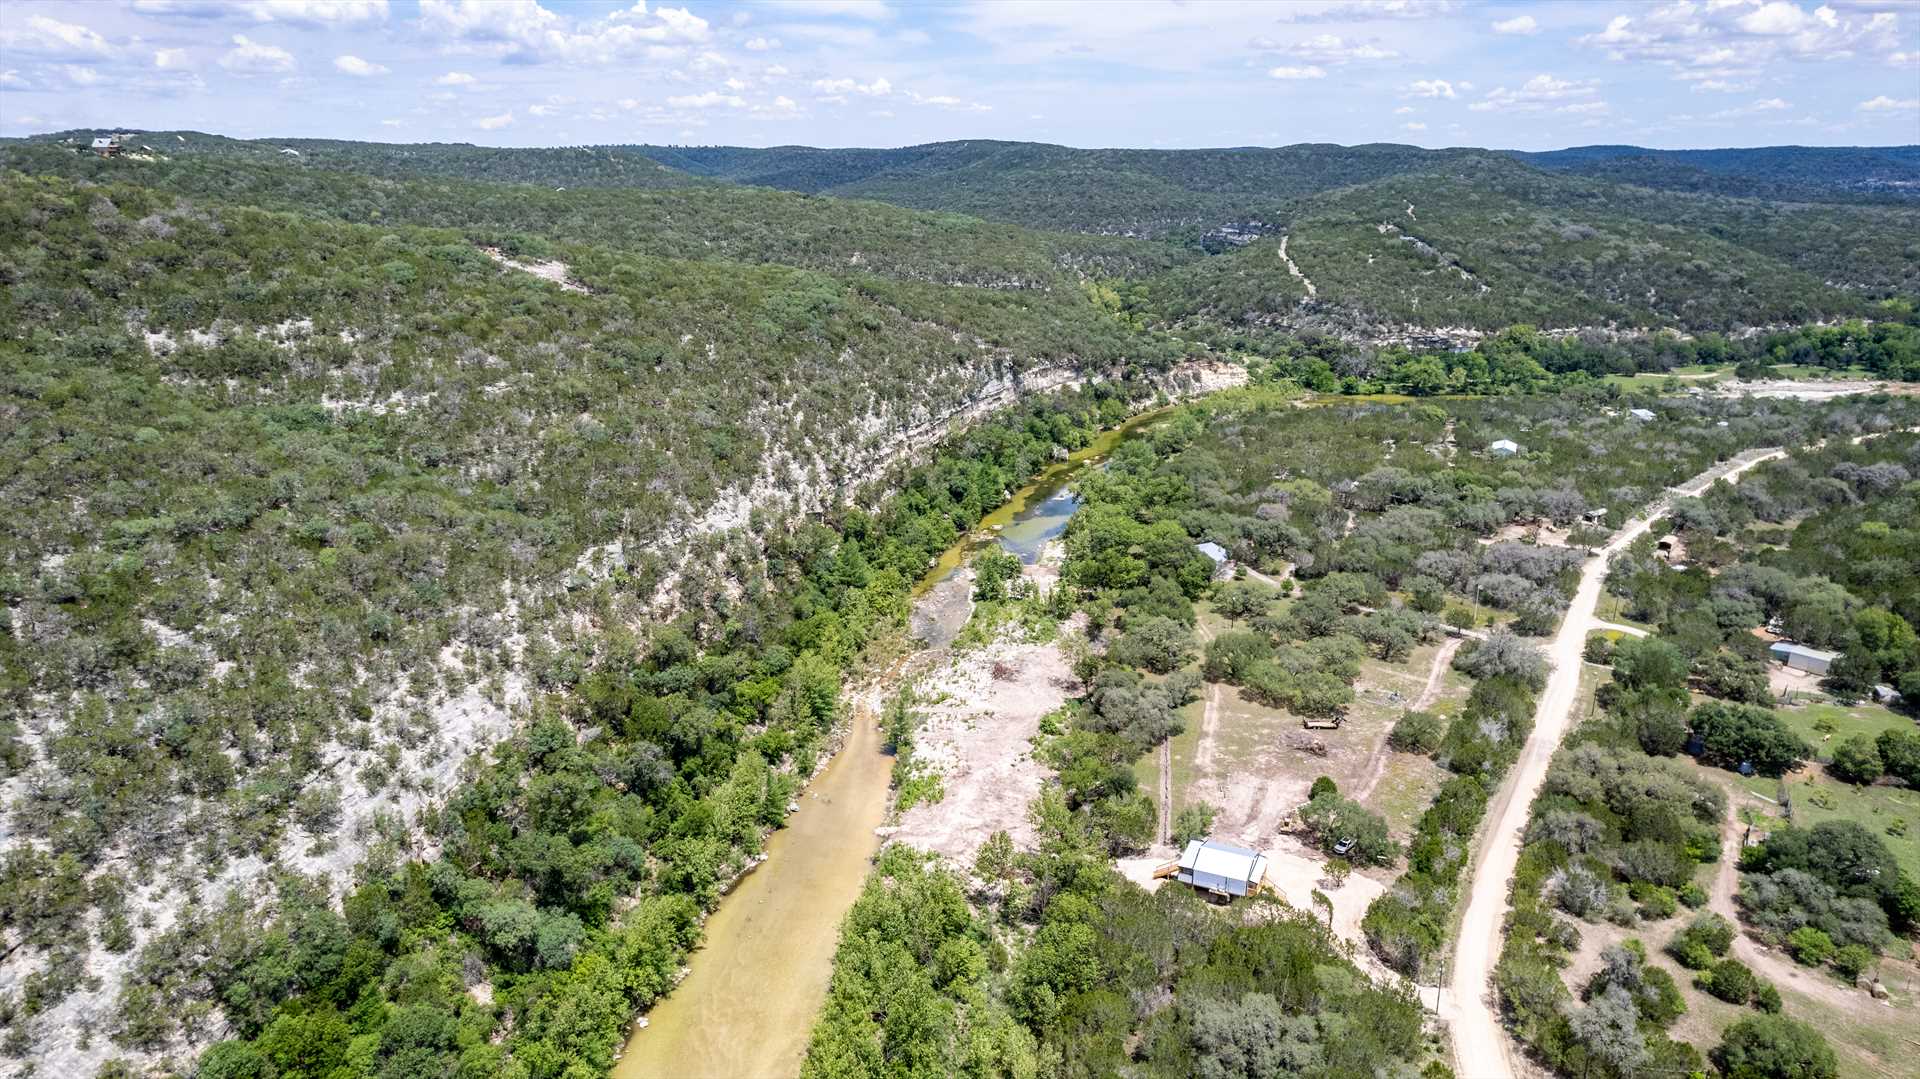                                                 Roadrunner Canyon Ranch occupies ten beautiful acres of the Texas Hill Country!